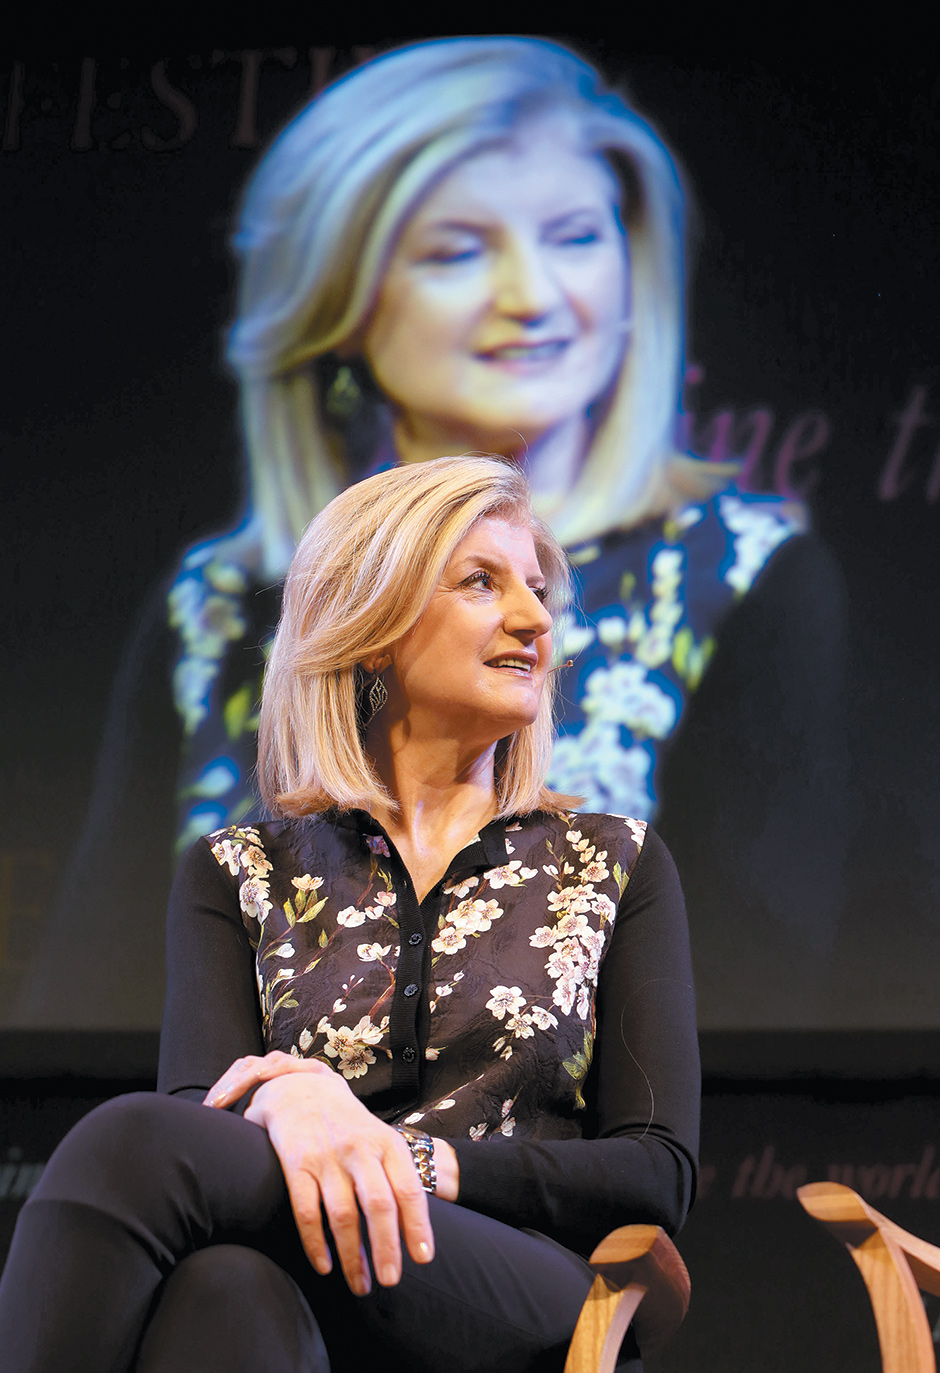 Arianna Huffington, editor in chief of The Huffington Post, talking about the baby boom generation at the Hay Festival, Hay-on-Wye, Wales, June 2014